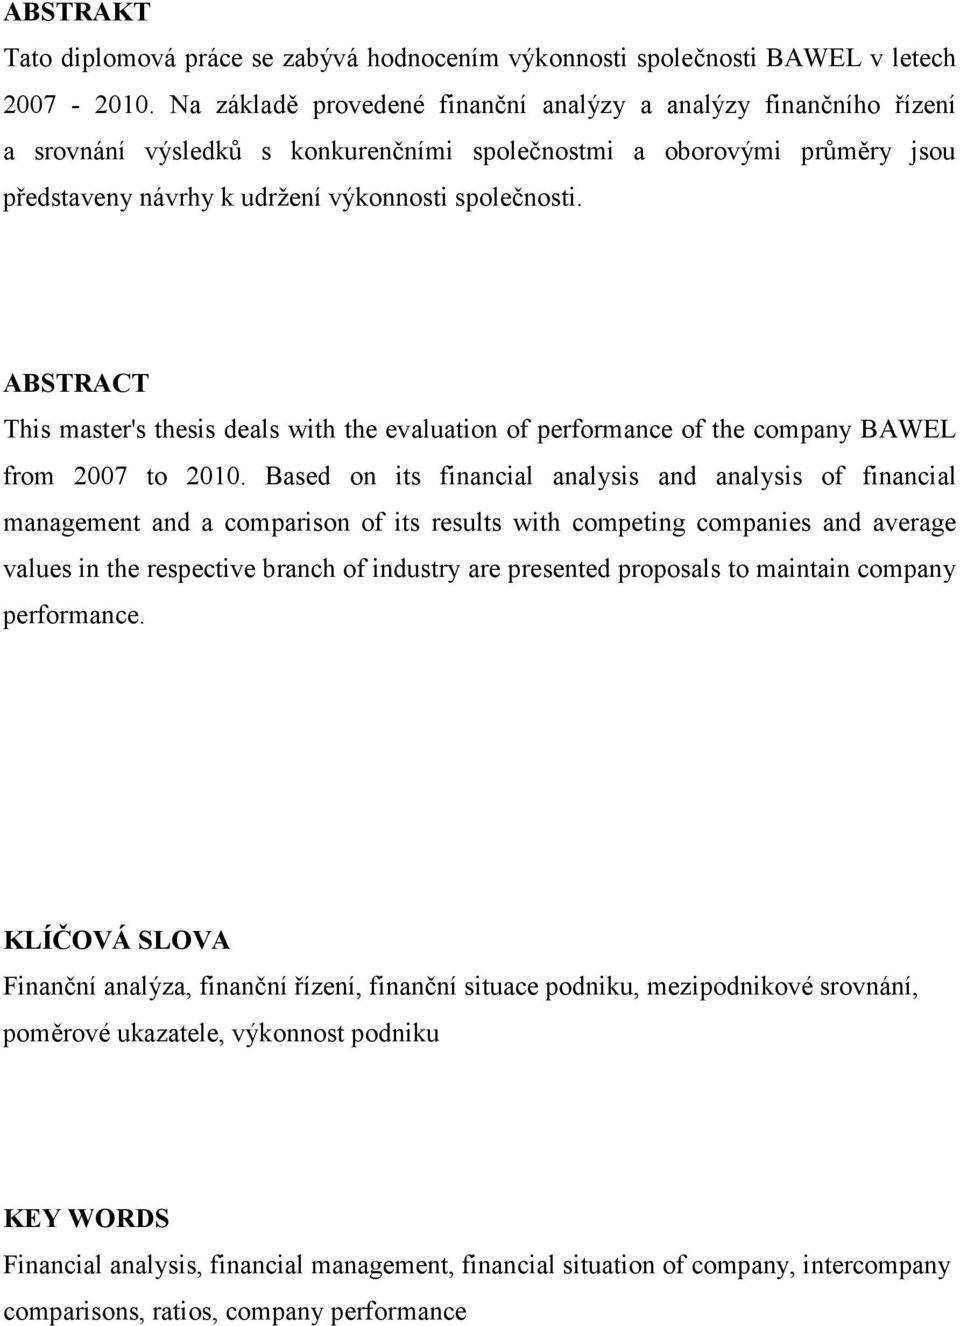 ABSTRACT This master's thesis deals with the evaluation of performance of the company BAWEL from 2007 to 2010.